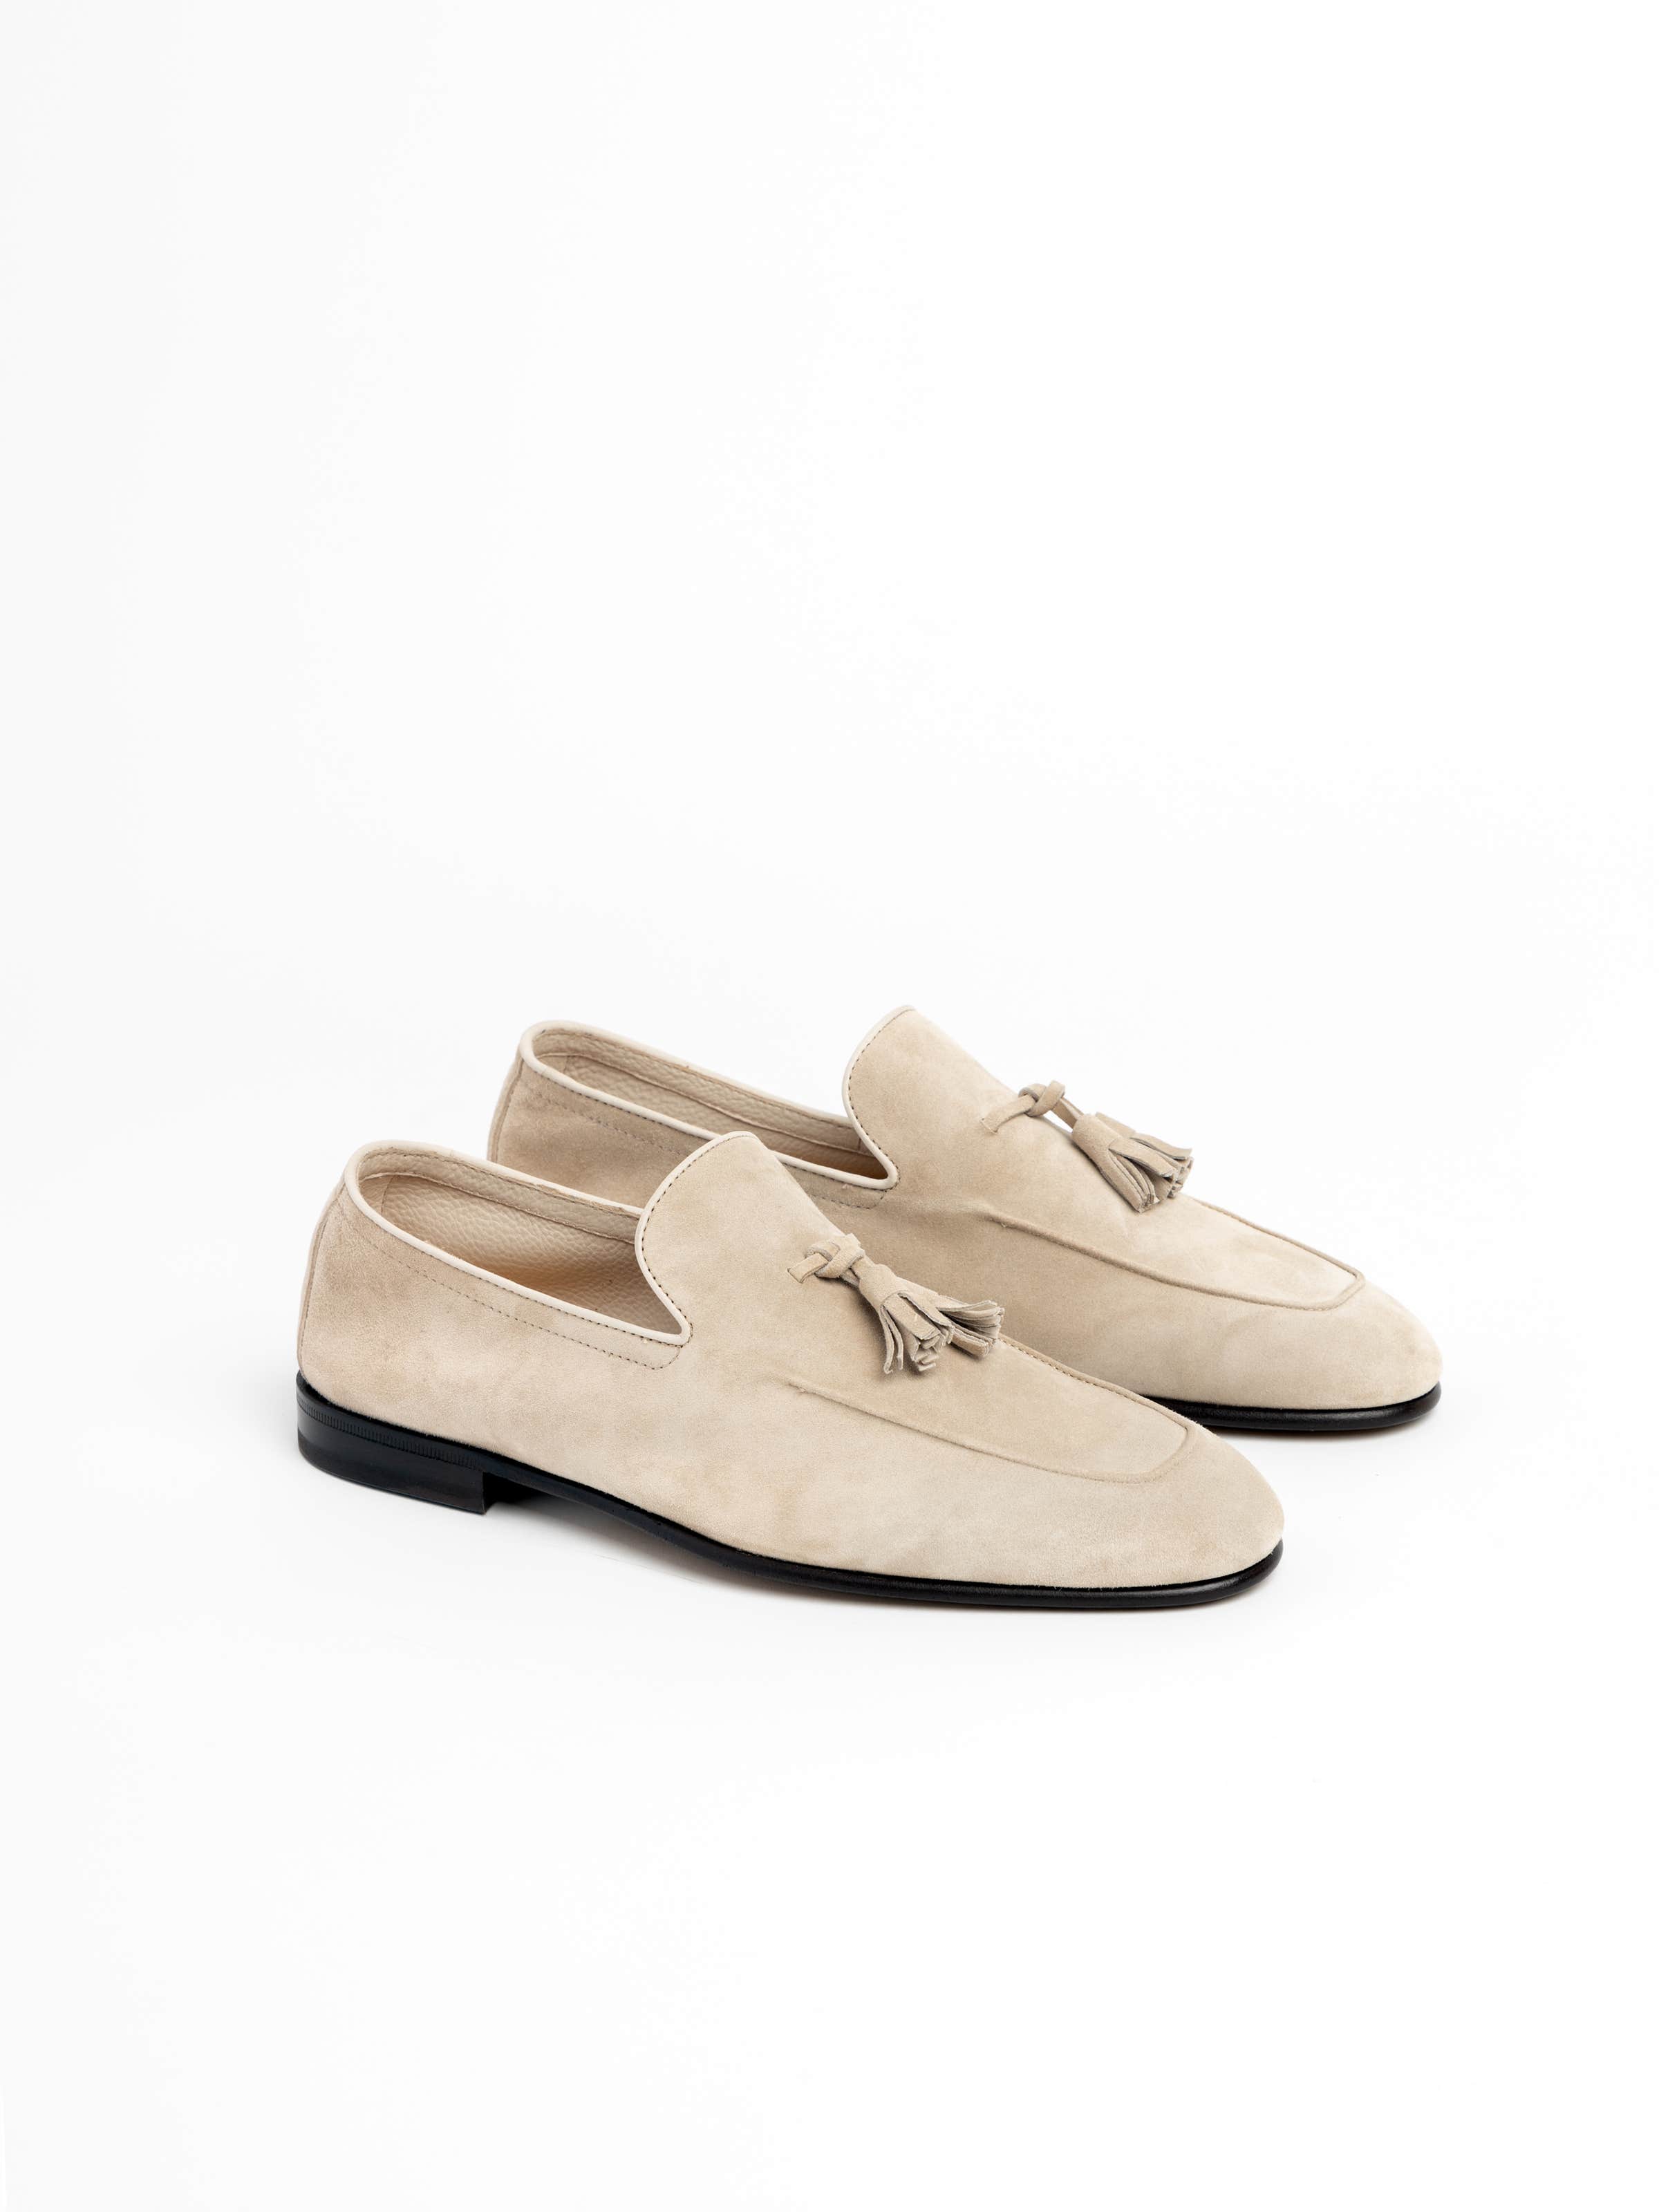 Sand Suede Unlined Loafers with Tassels